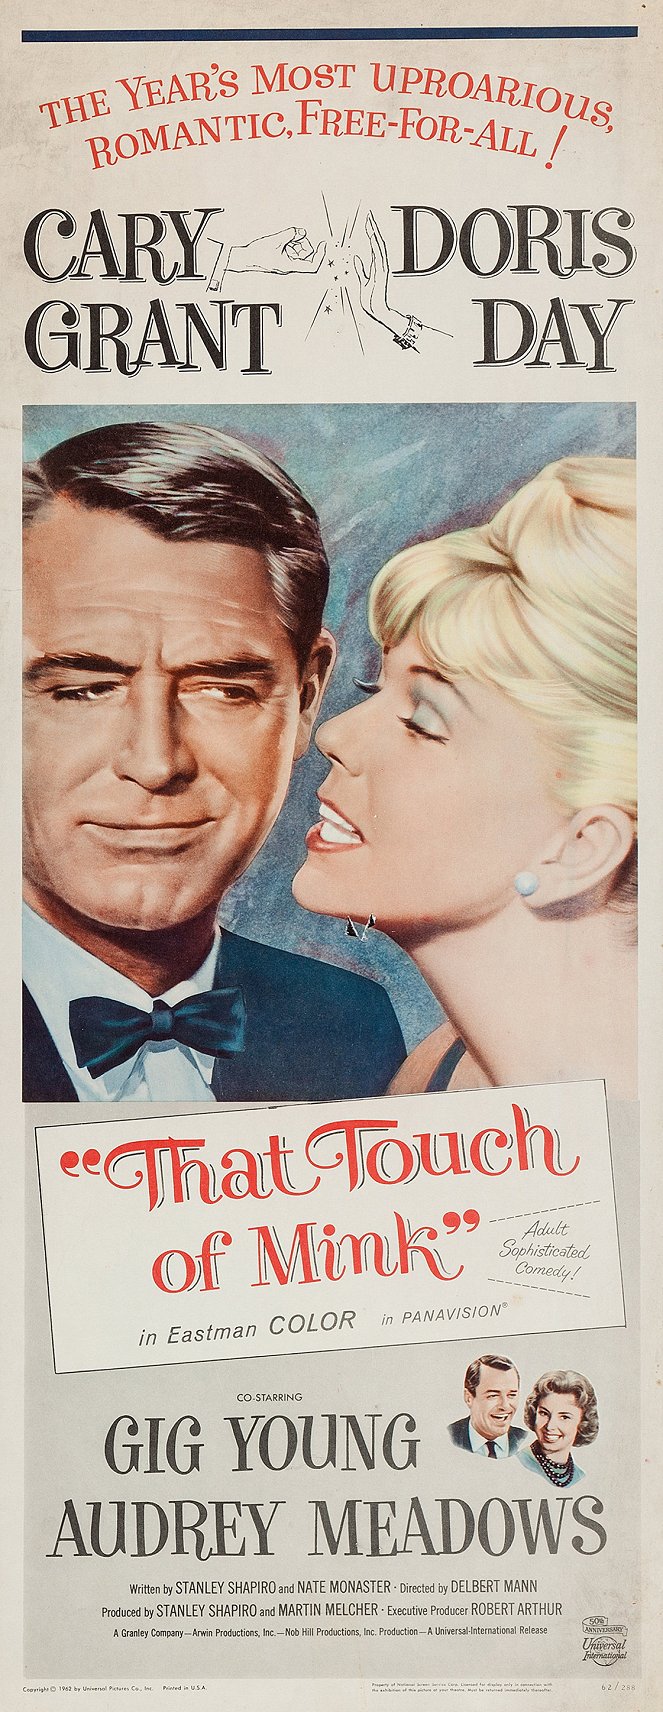 That Touch of Mink - Posters